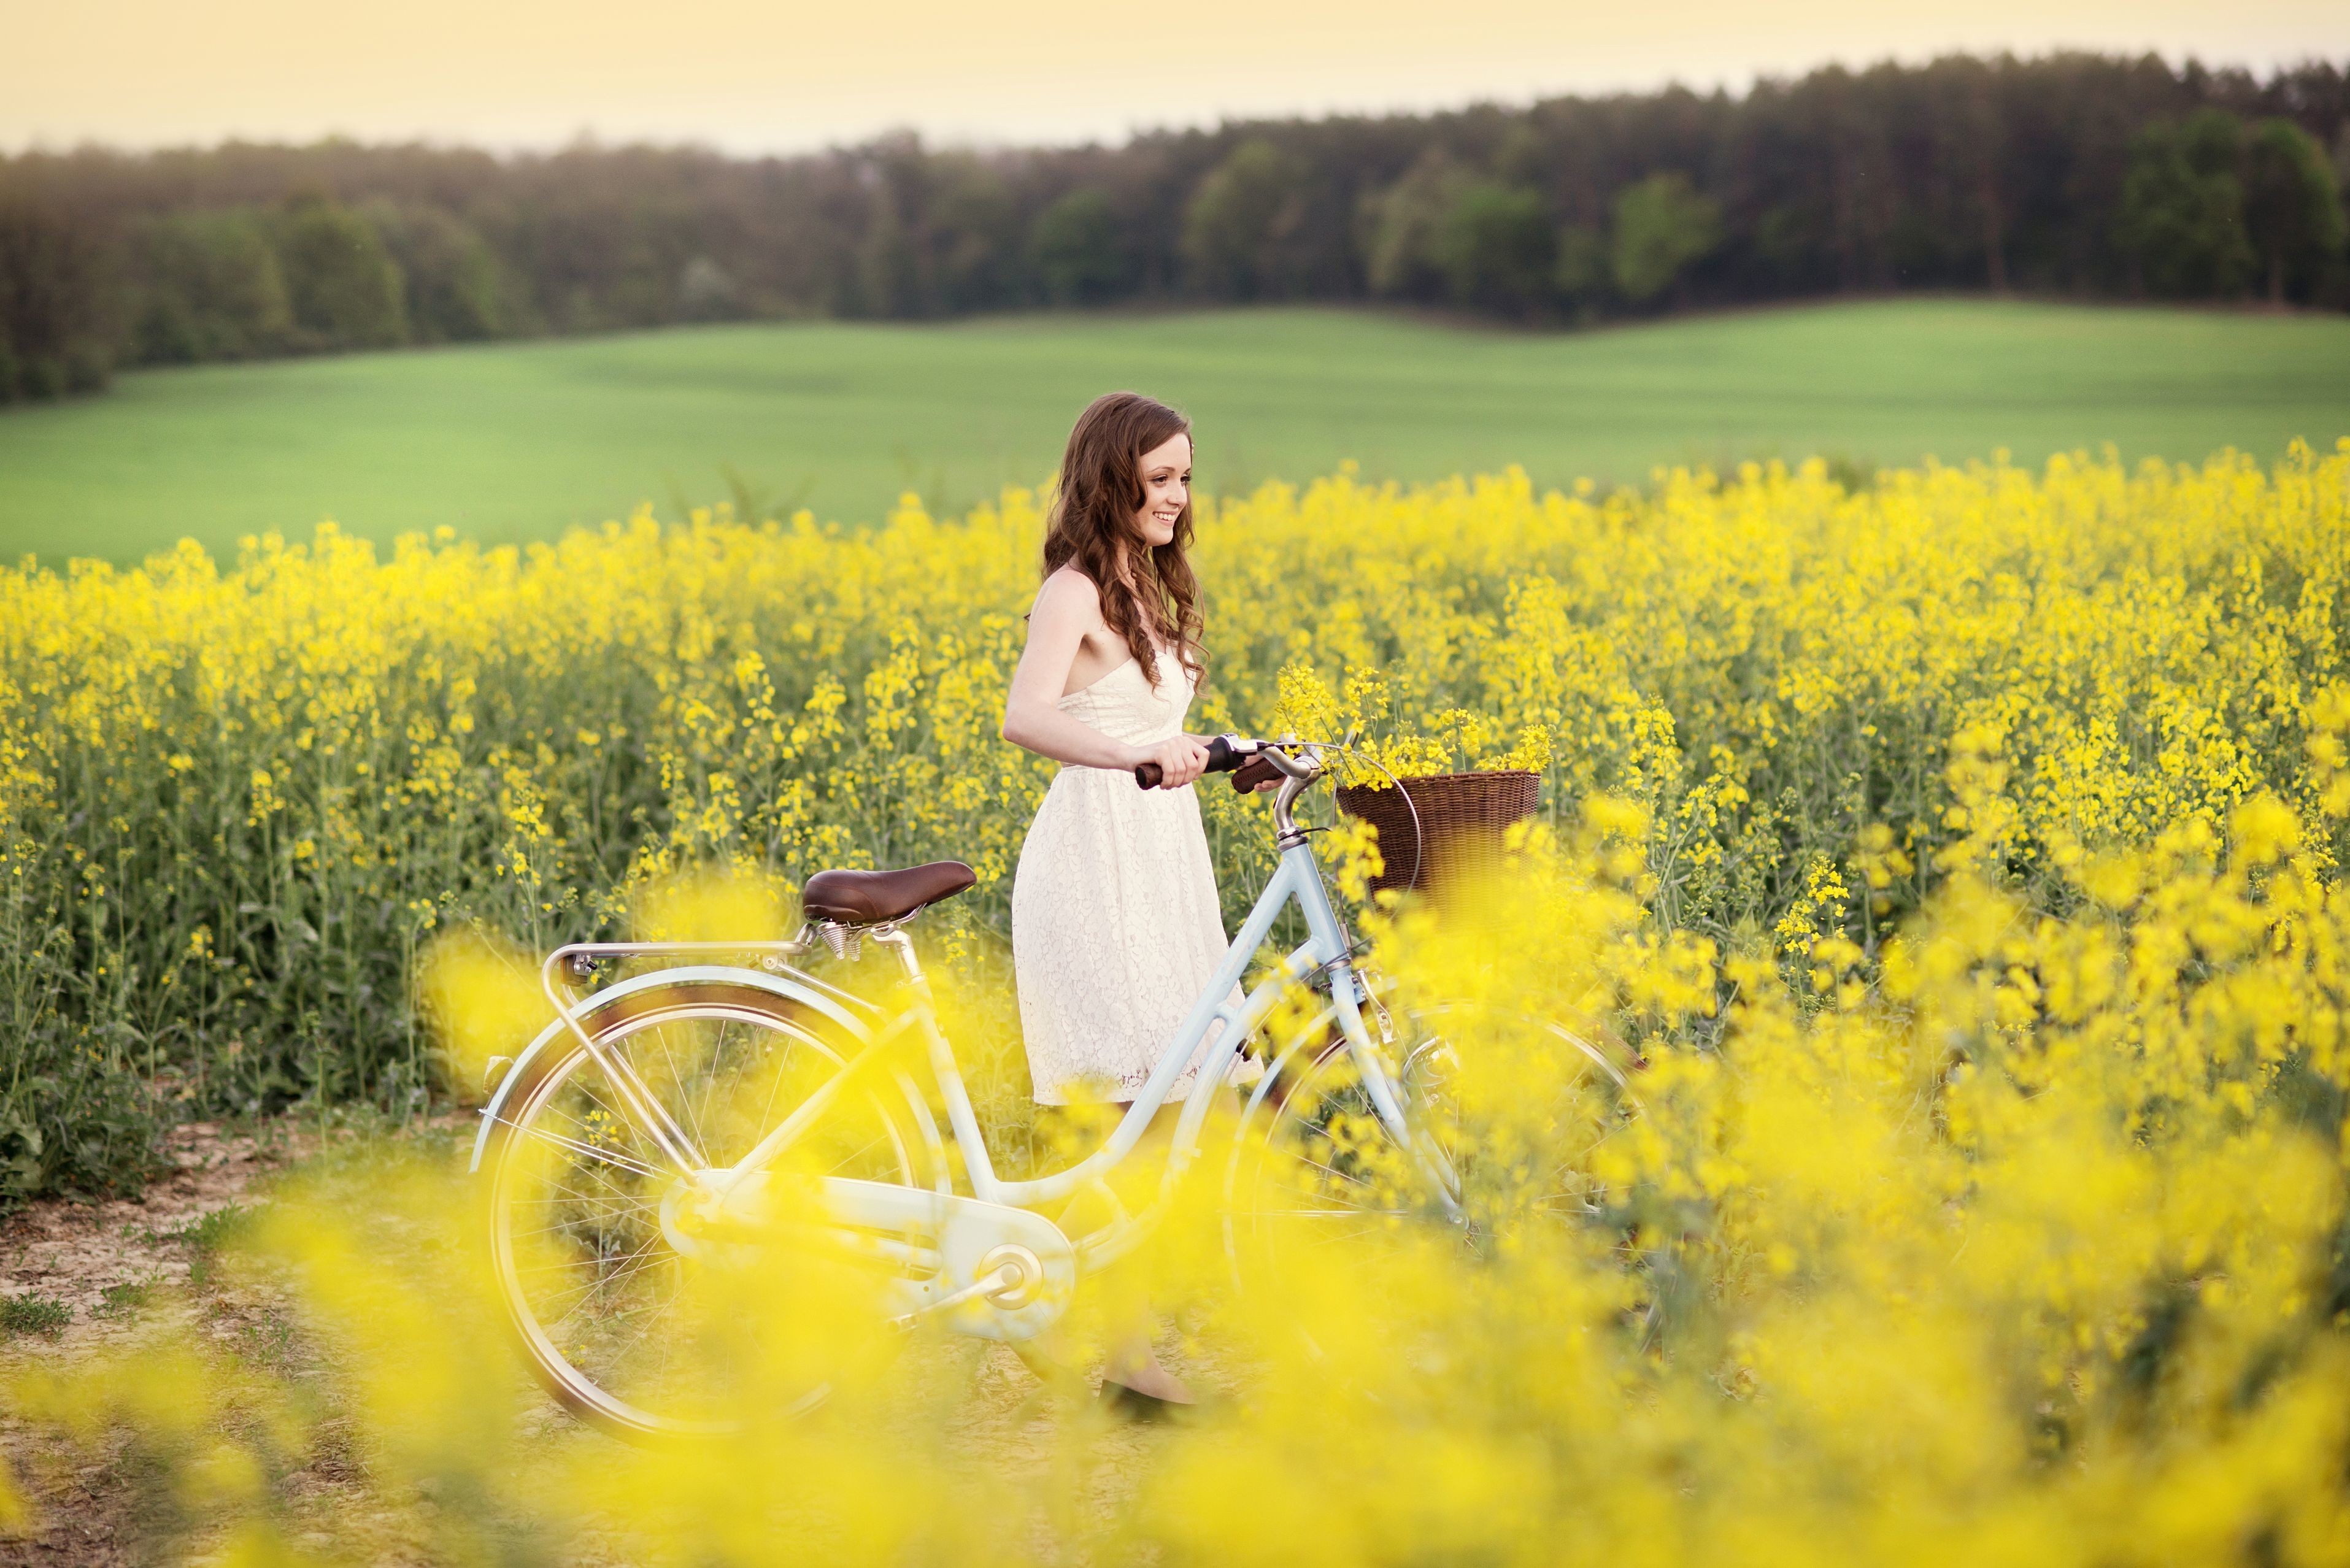 Women Model Bicycle Field Yellow Flowers Rapeseed Women With Bicycles 3830x2556